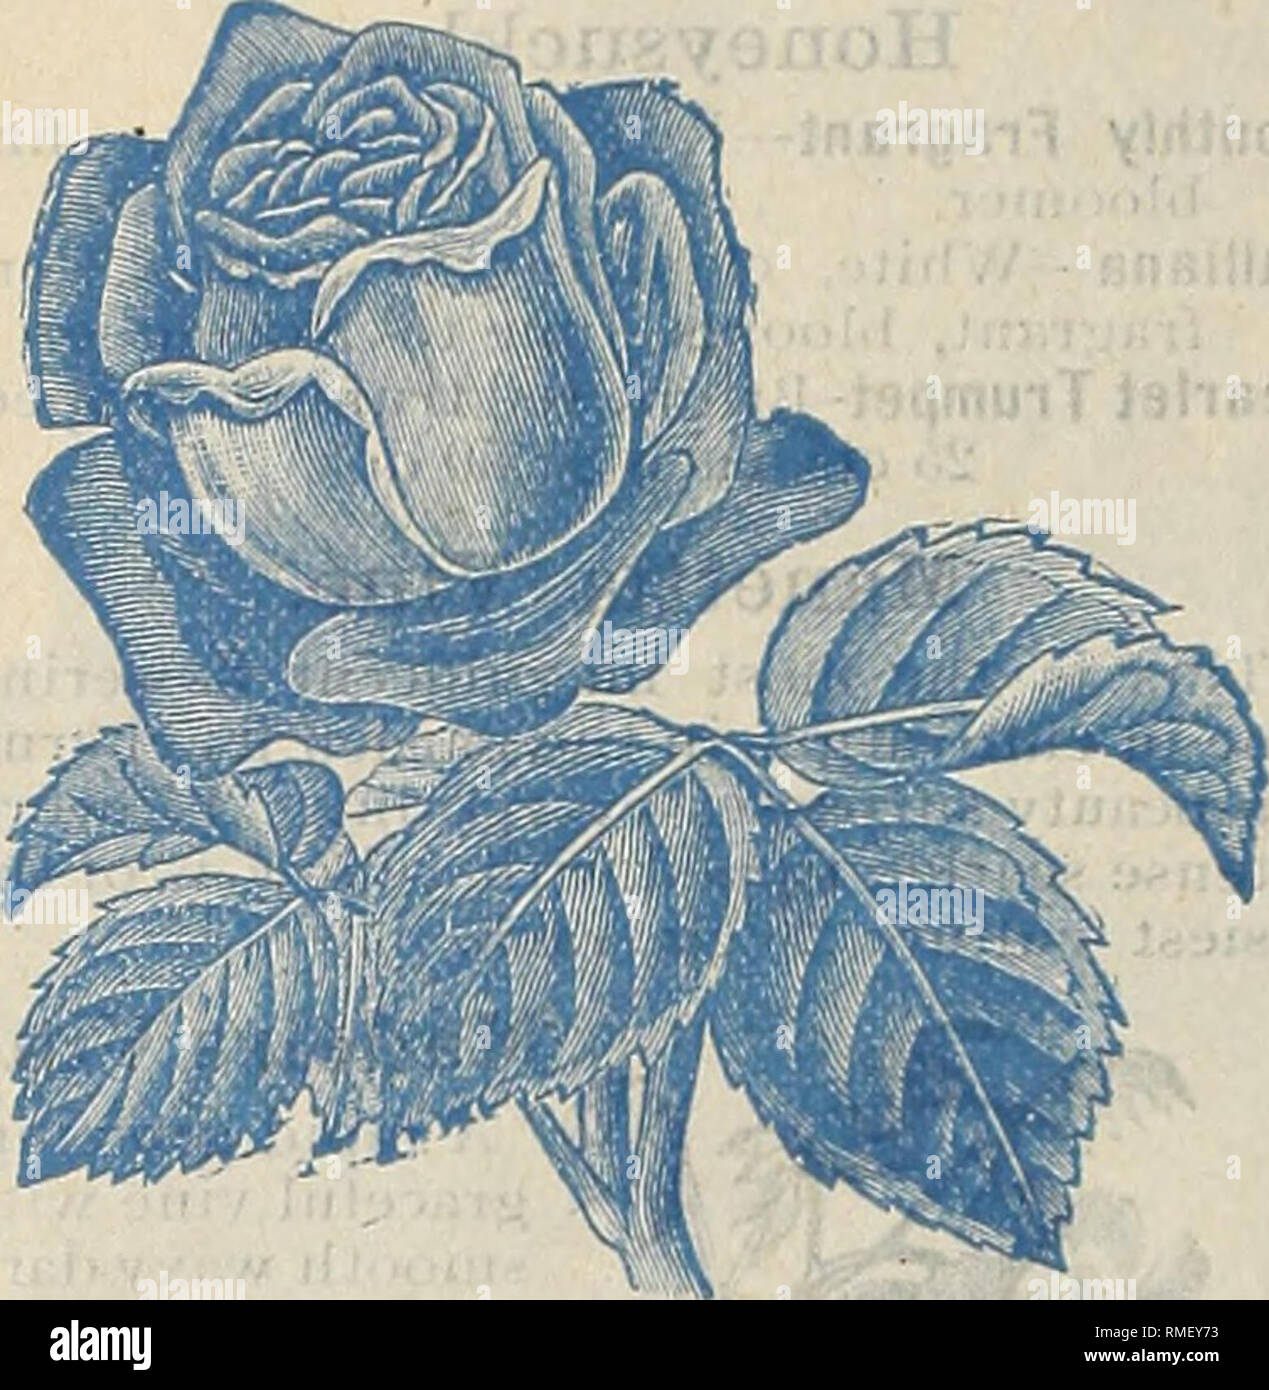 . Annual catalogue : seeds, bulbs, plants, implements, etc. Seed industry and trade; Seeds, Catalogs. J. CHAS. McCULLOUGH, N. E. Cor. 2nd and Walnut Sts., Cincinnati, O- Everblooming Roses. Catherine Mermet, bright flesh color. Bon Silene, deep rose. Devoniensis, creamy white. Hermosa, pink, very double. Marechal Neil, golden yellow Niphetos, pure white. La France, very double, silvery pink. Bride, white, large aud full.. Gen'l Jacqueminot. Papa Gontier, crimson. Maria Van Houtte, straw yellow color Perle des Jardines, double, yellow Queen of Bedders, crimson. Small Plants, 10 bts. each, $1.00 Stock Photo